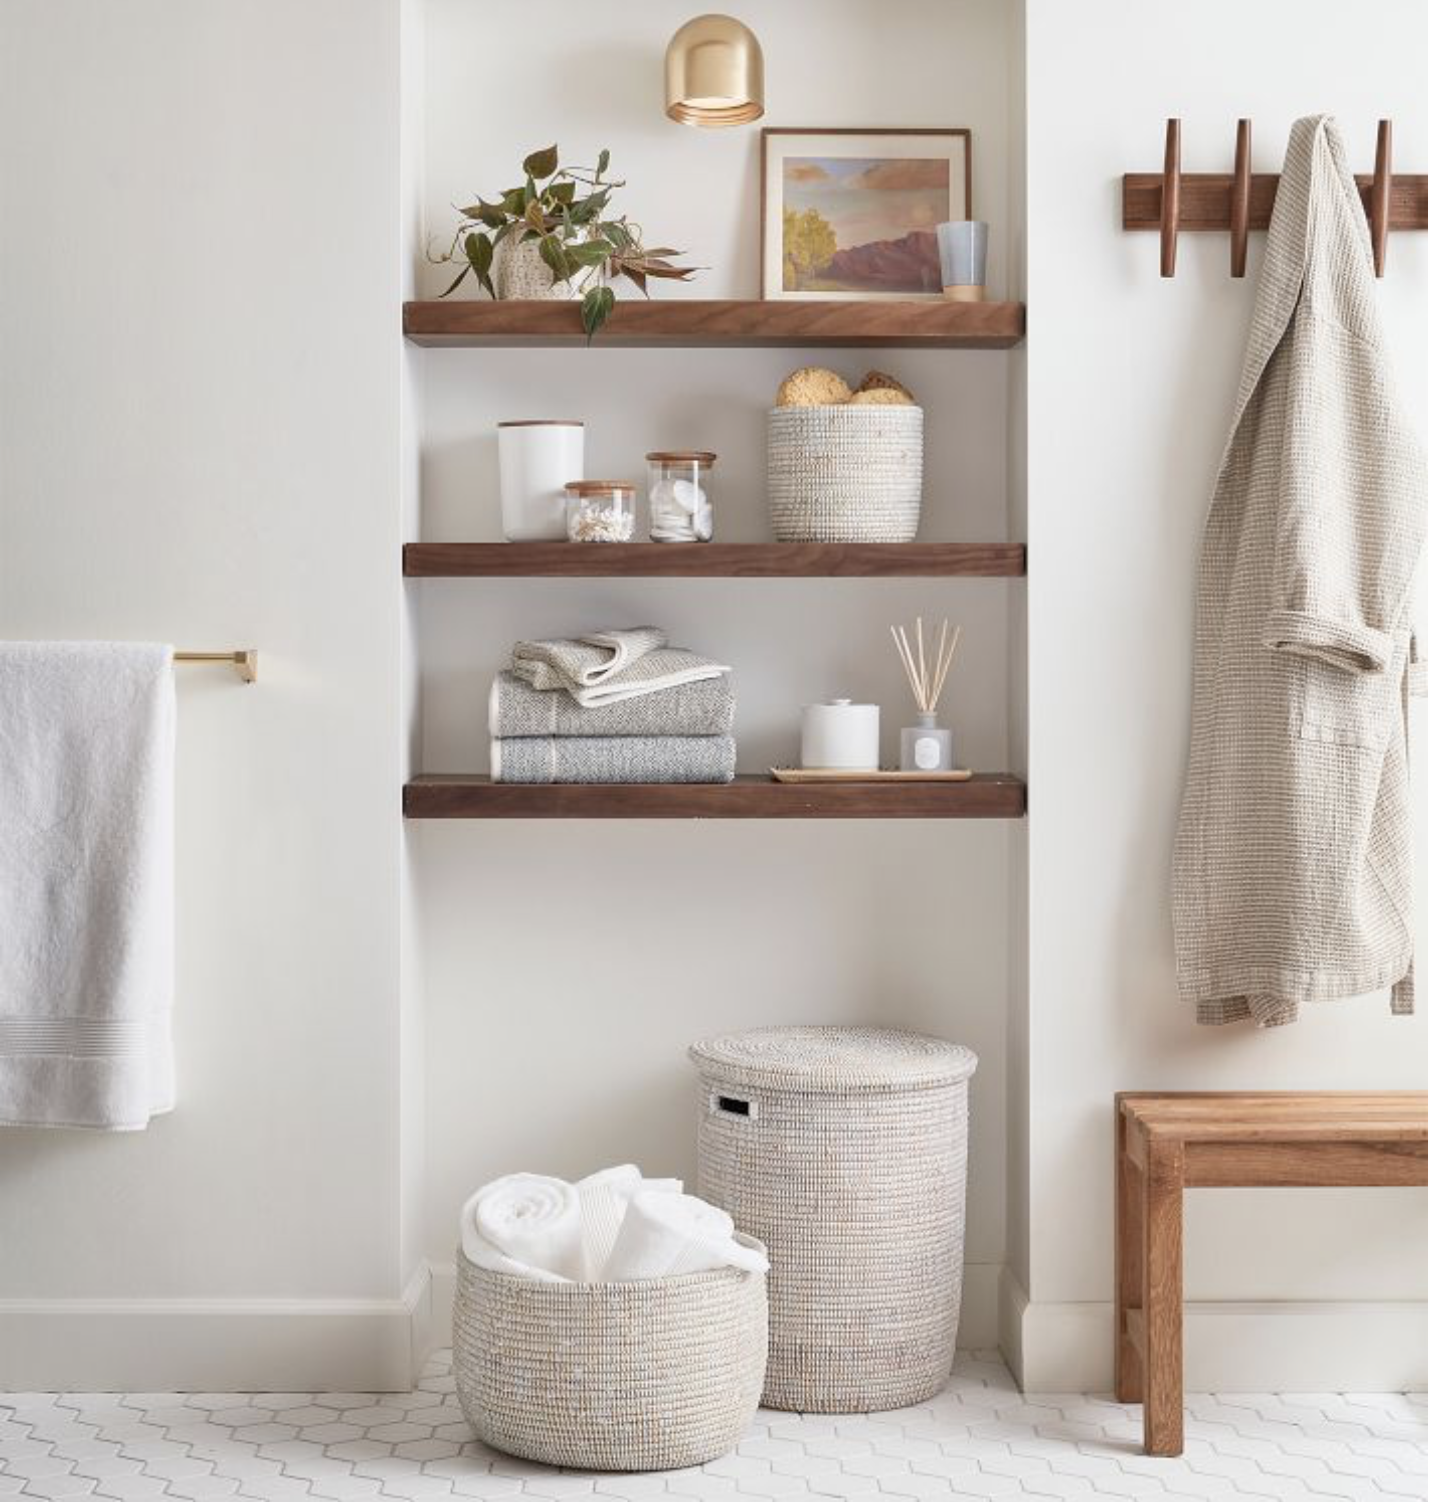 styling-your-shelves-to-perfection-bathroom-rejuvination.png